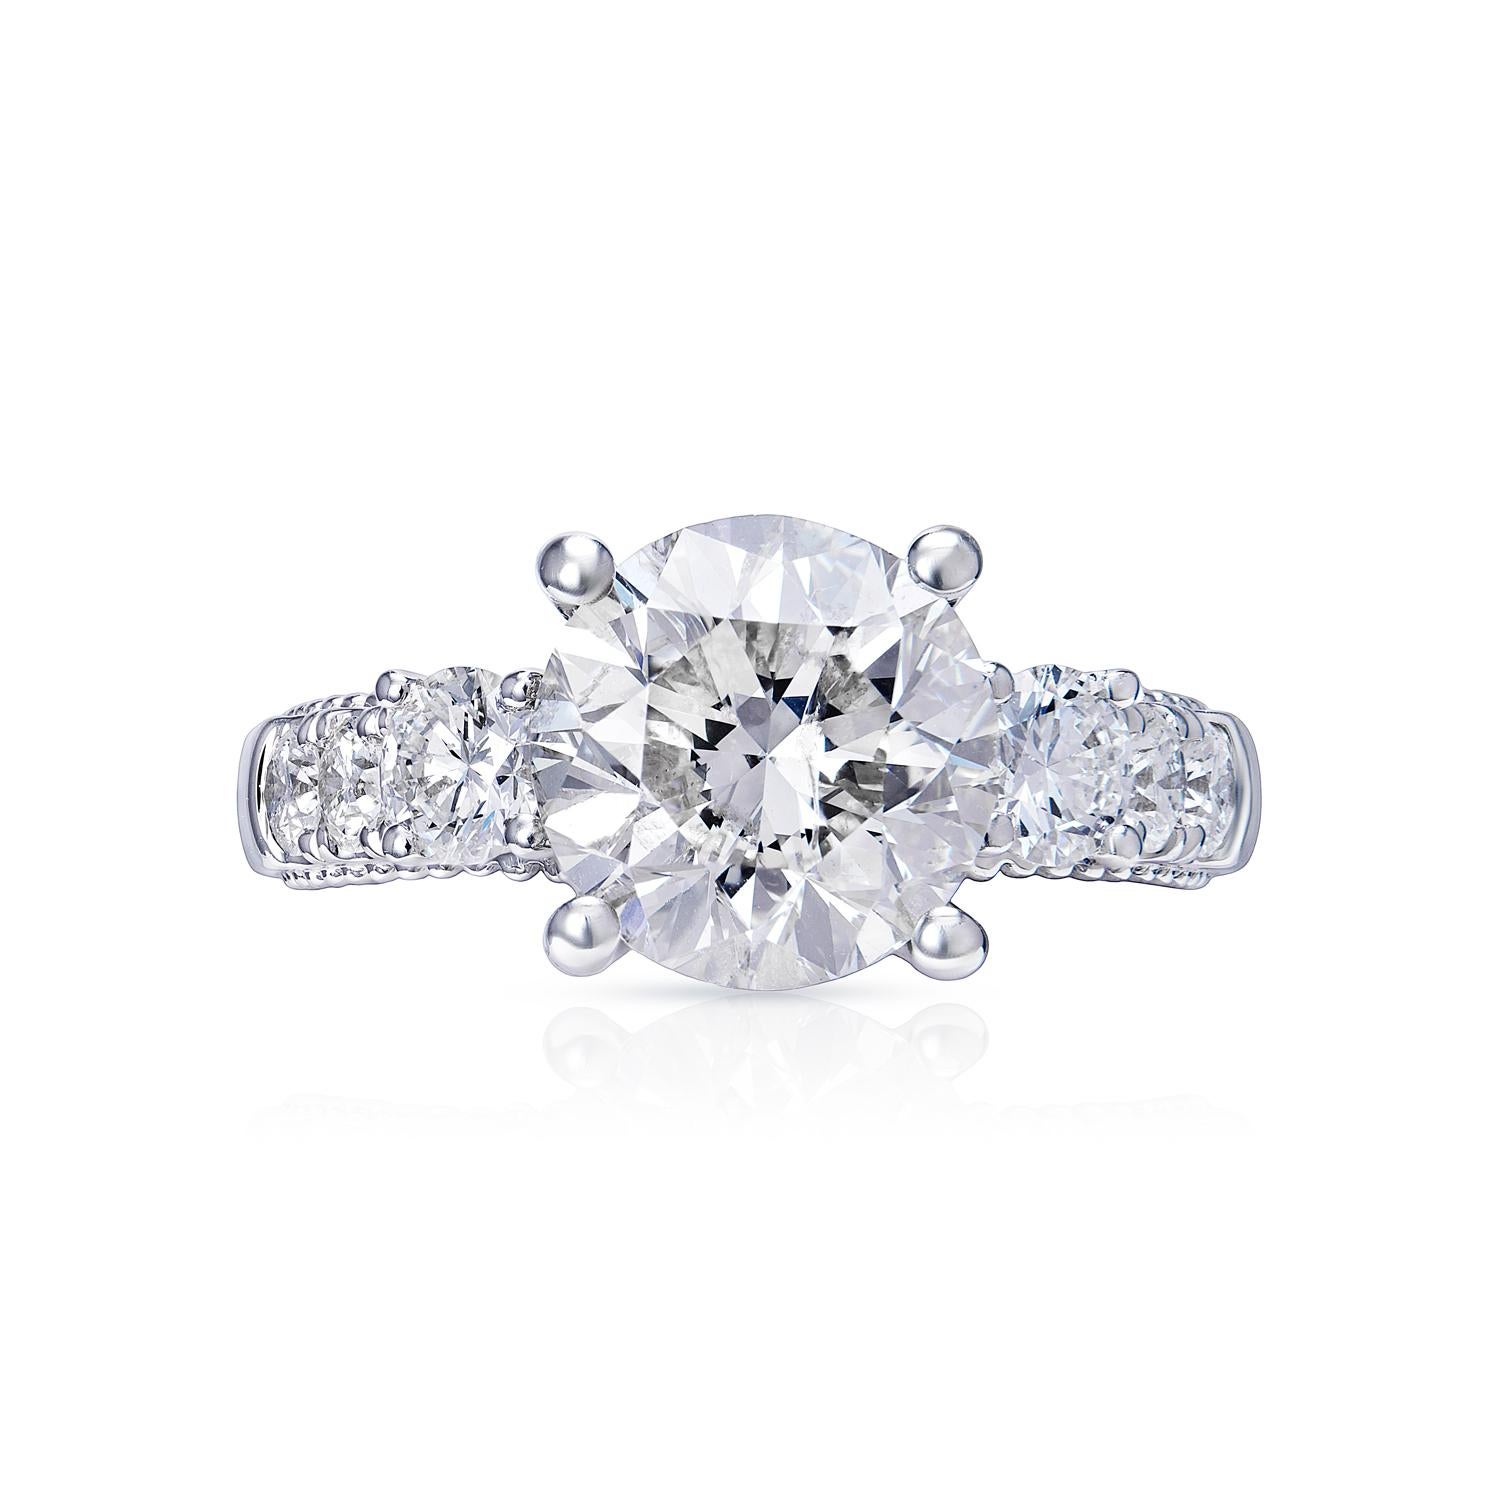 Center Earth Mined Diamond:
Carat Weight: 3.03 Carats
Color: G
Clarity: VS2
Style: Round Brilliant Cut

Ring:
Total Carats:3.96 Carats
Metal: 18 karat White Gold 5.80 Grams
Diamonds: 0.93 Carats
Style: Round Brilliant Cut
Setting: Three-stone & 4